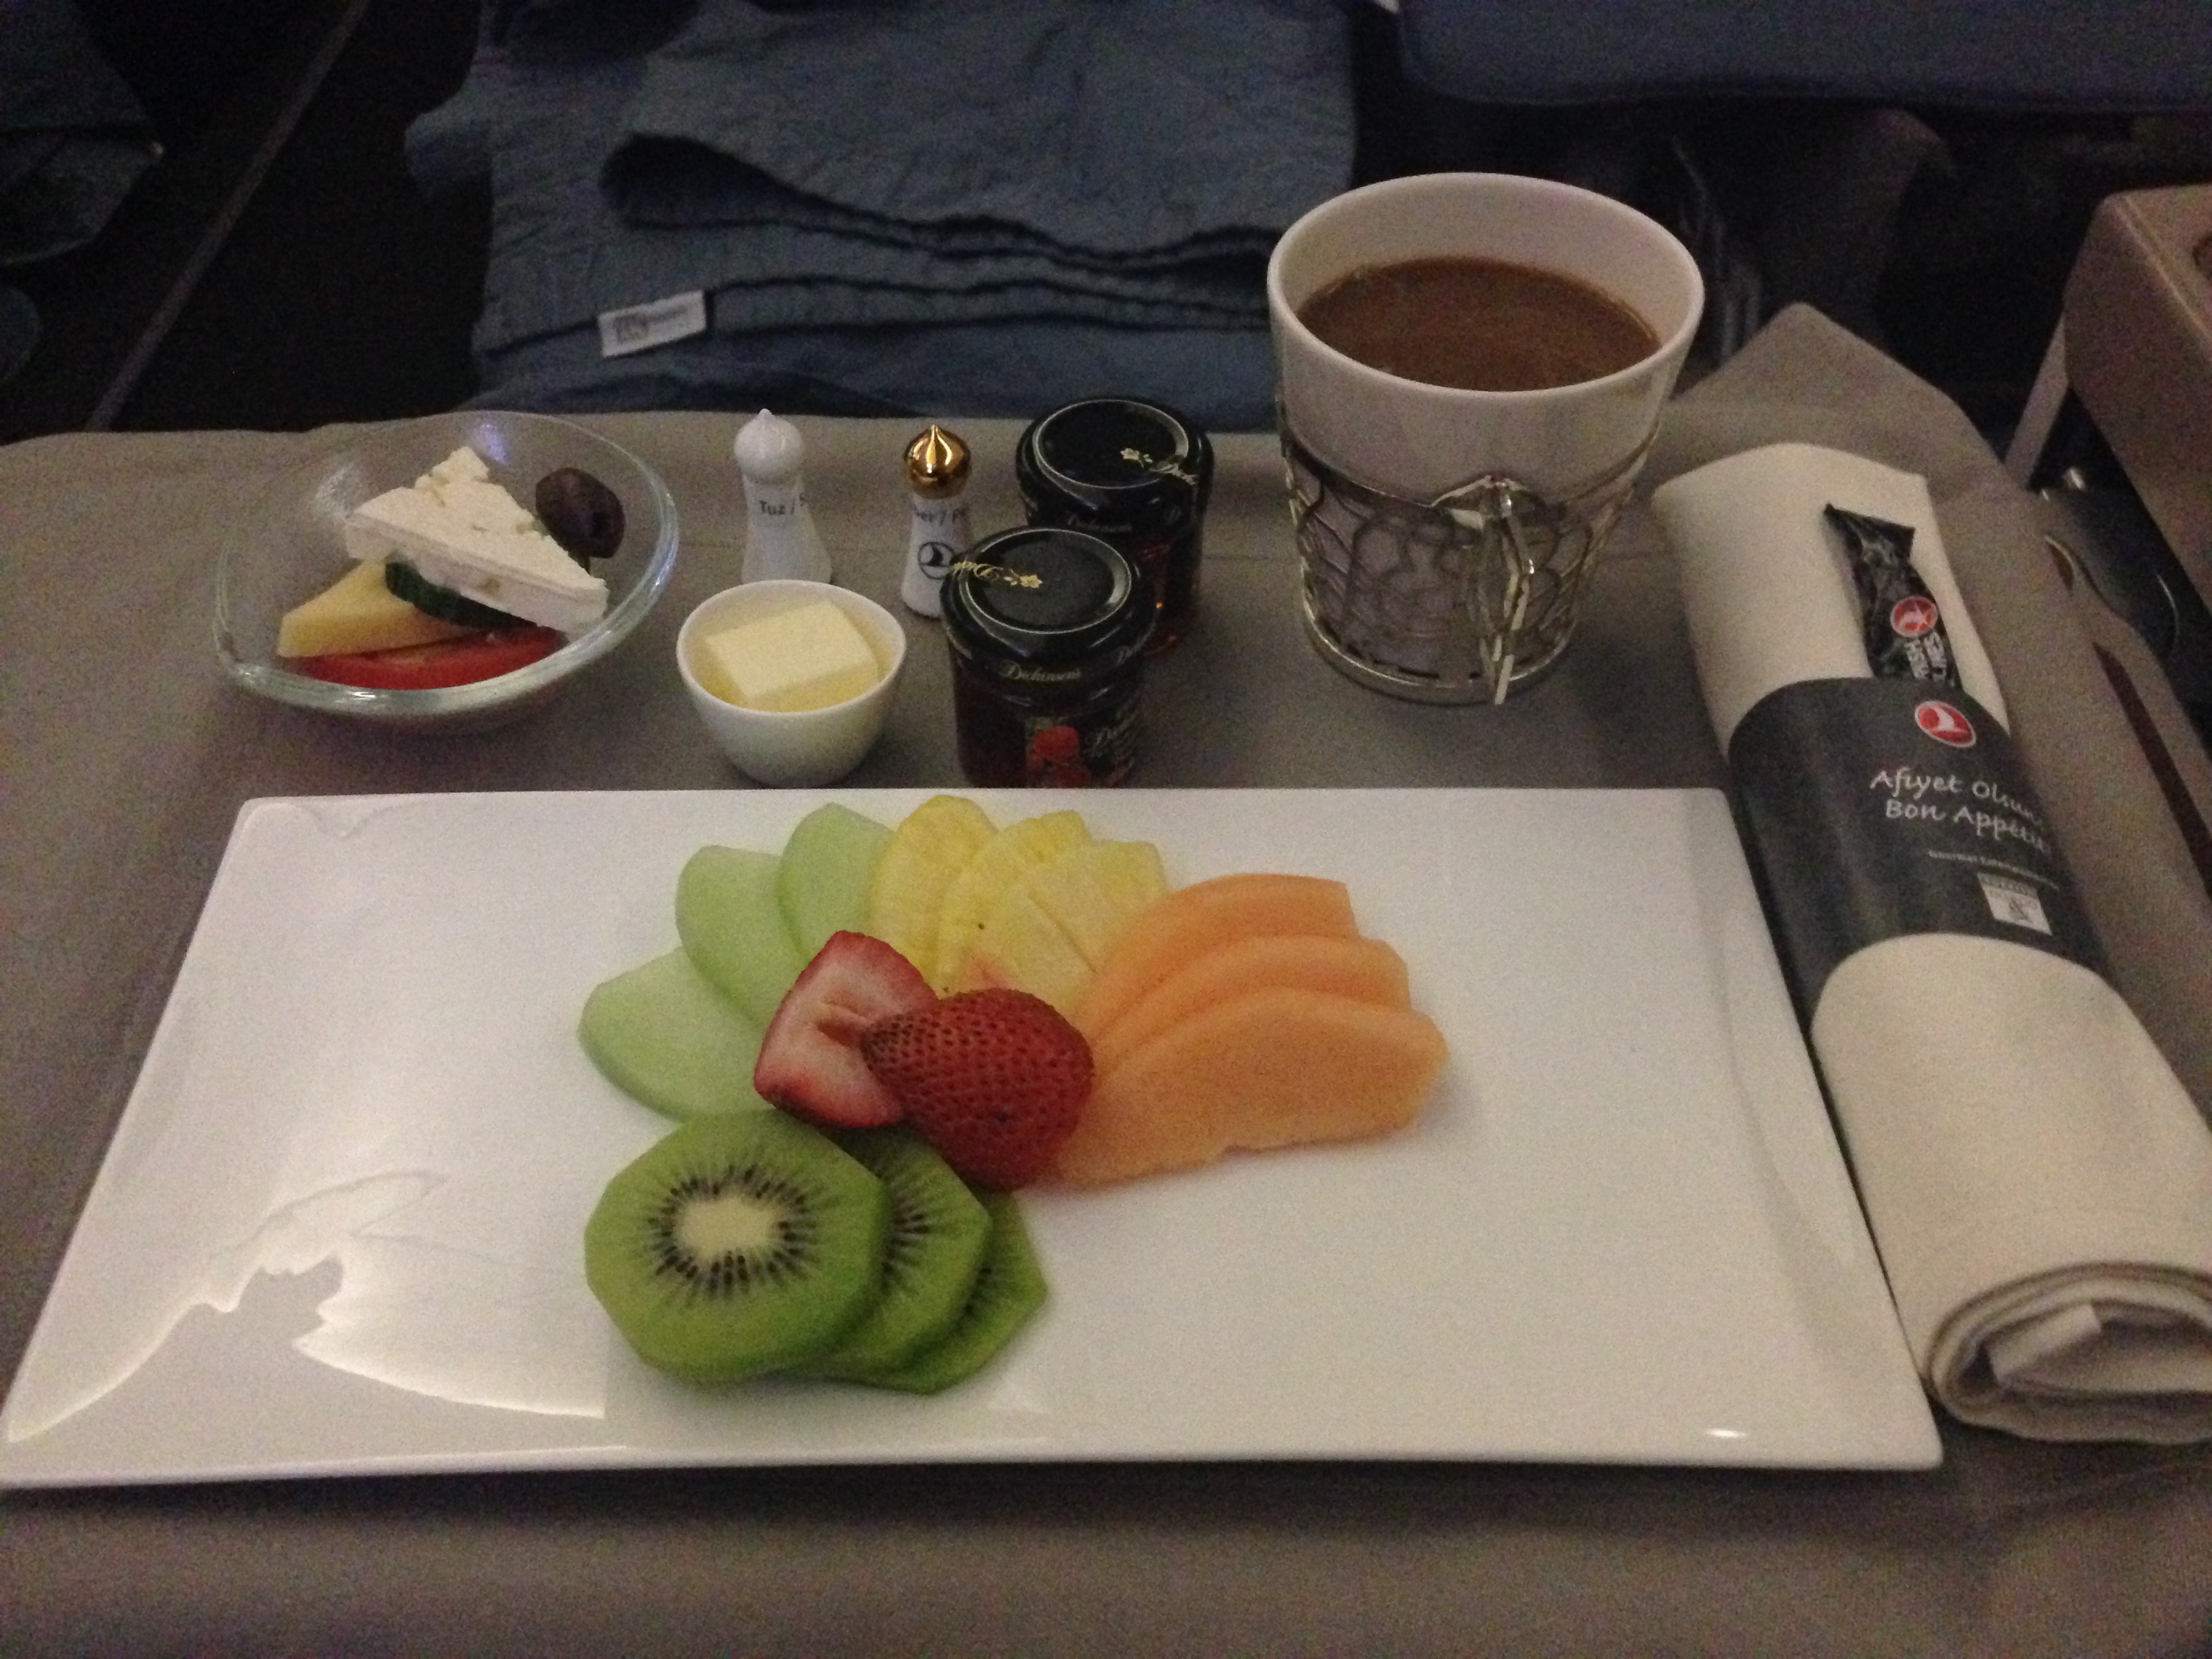 Turkish Airlines Inflight Meal (New York-Istanbul)